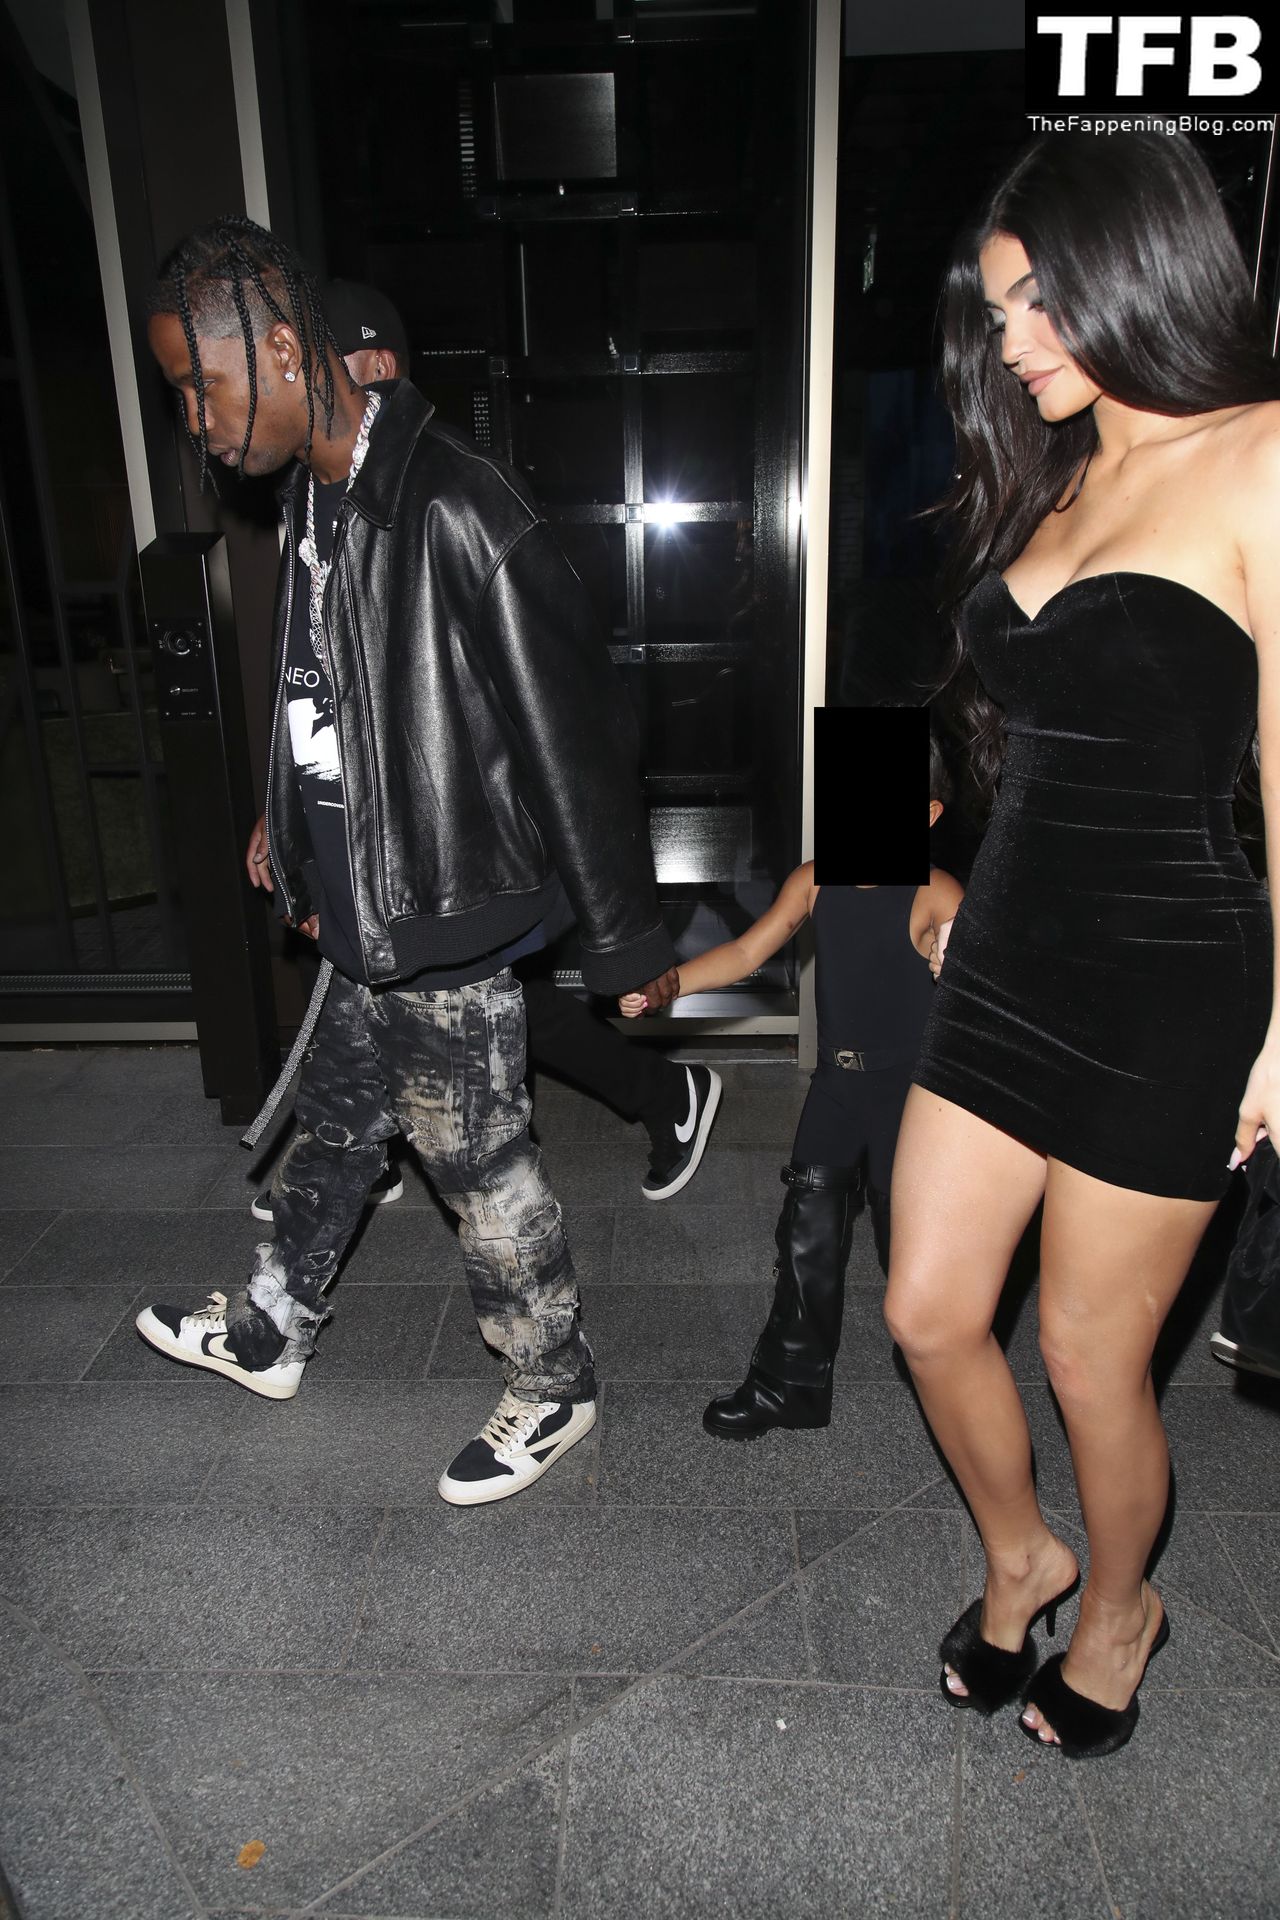 Kylie Jenner Sexy The Fappening Blog 21 - Kylie Jenner Steps Out For Dinner at Nobu London (26 Photos)